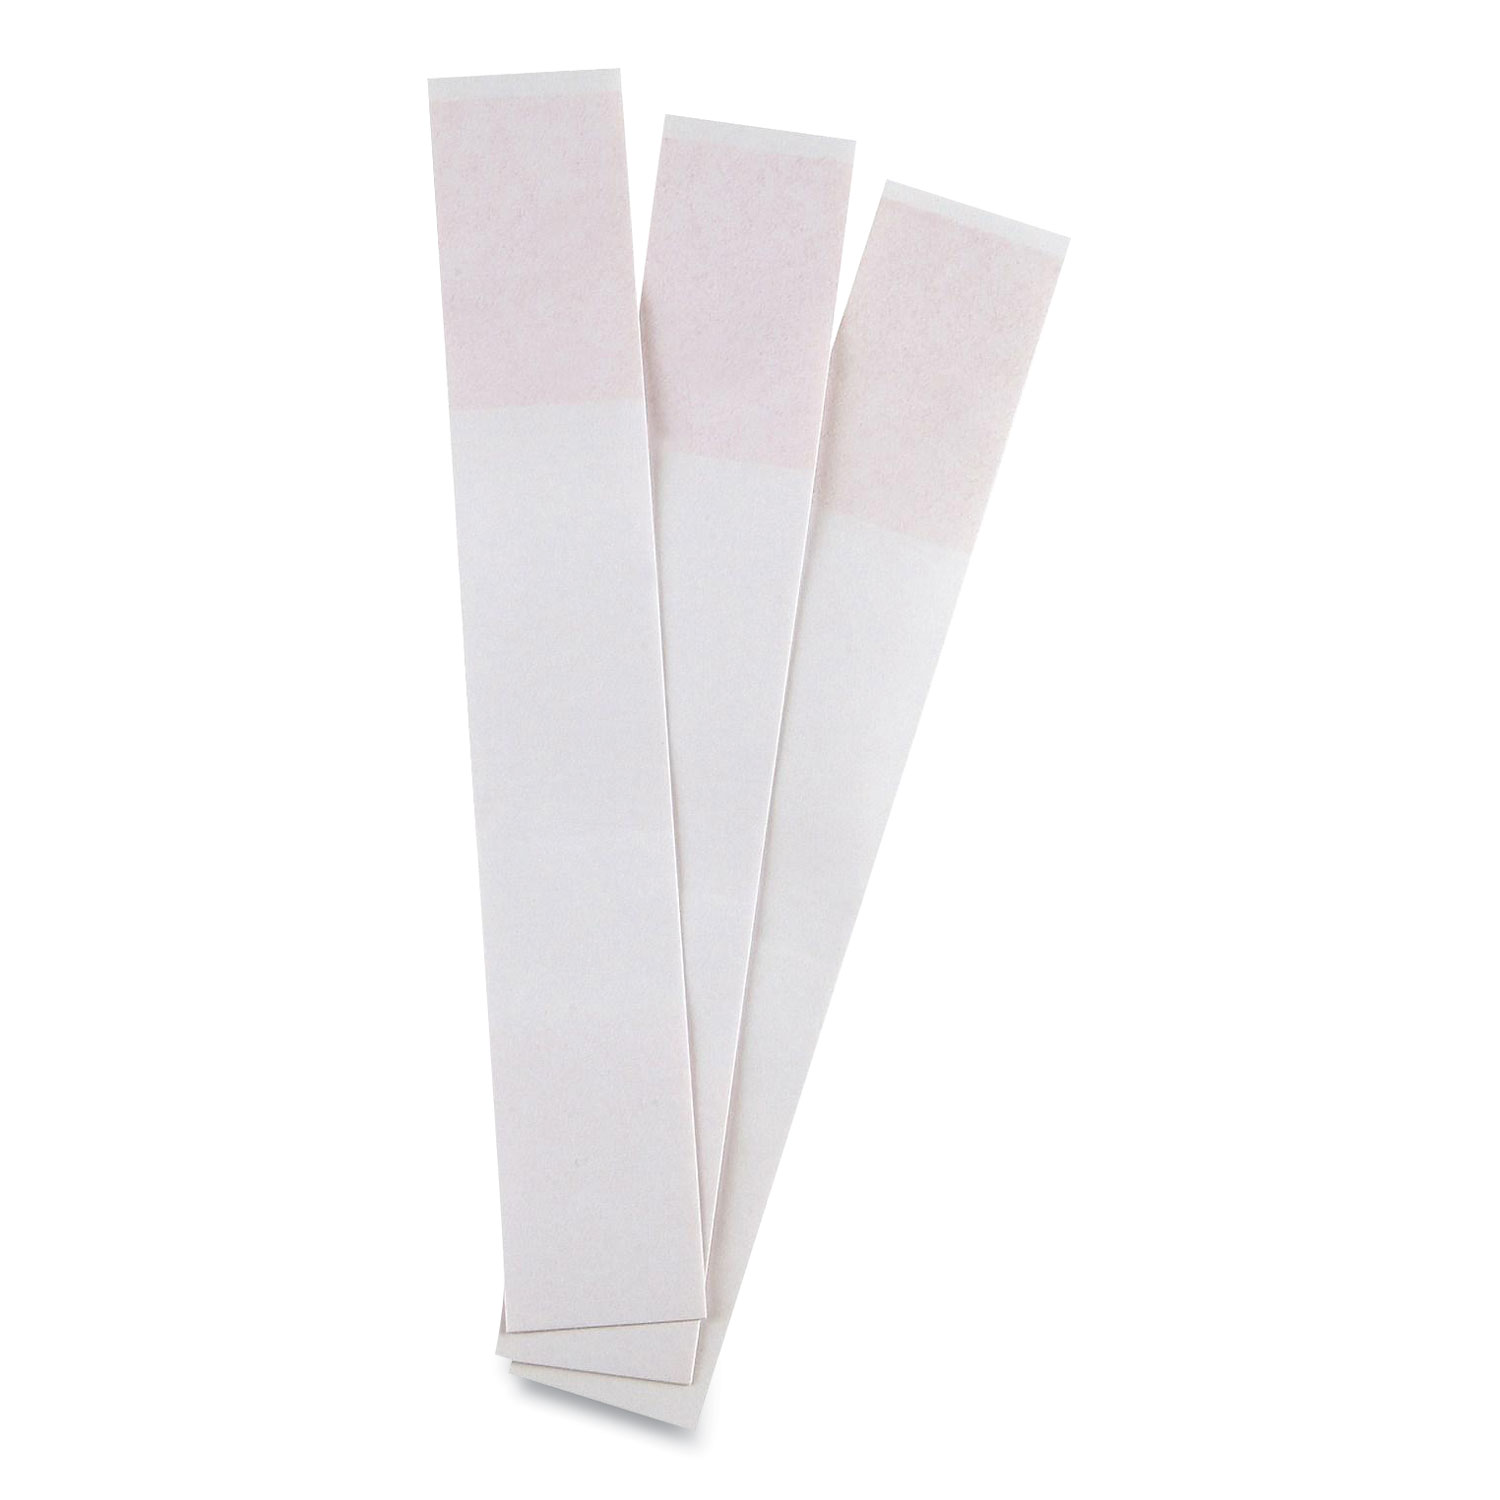  CONTROLTEK 560013 Blank Currency Straps, Pre-Sealed, White, 1,000/Pack (CNK592346) 